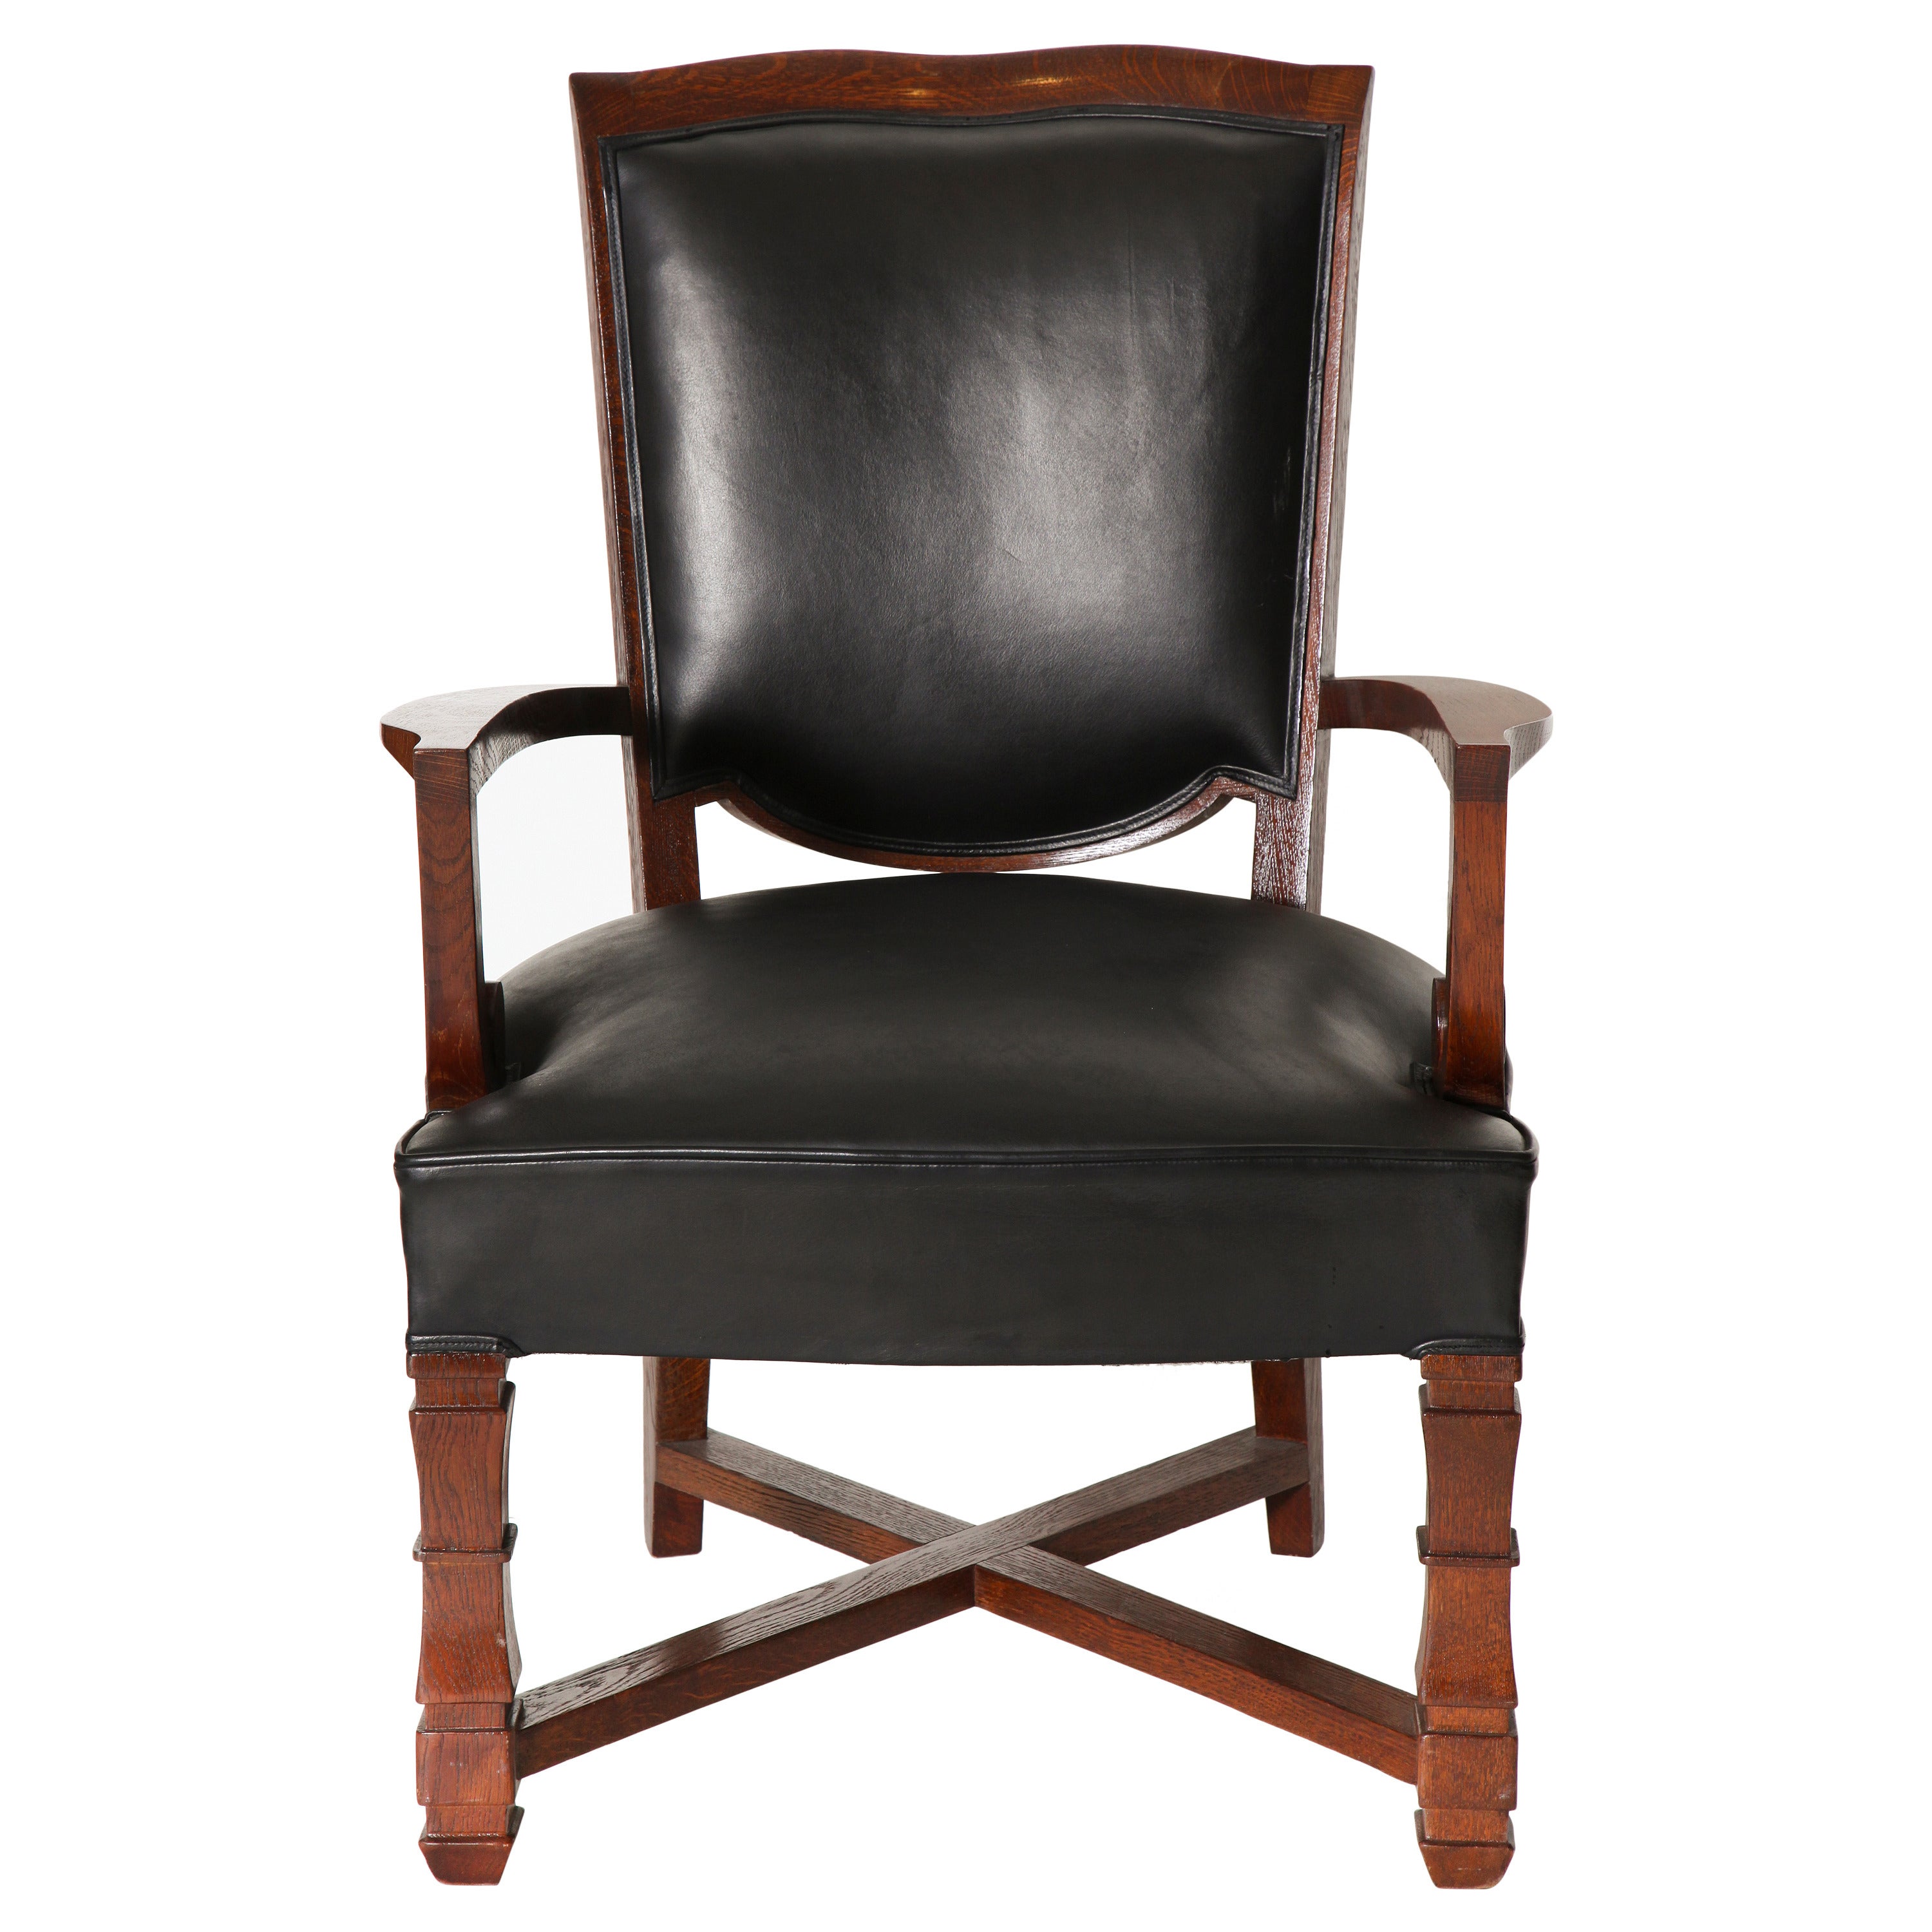 Mahogany and leather visitor armchair by Jules Leleu. Marked with model number.